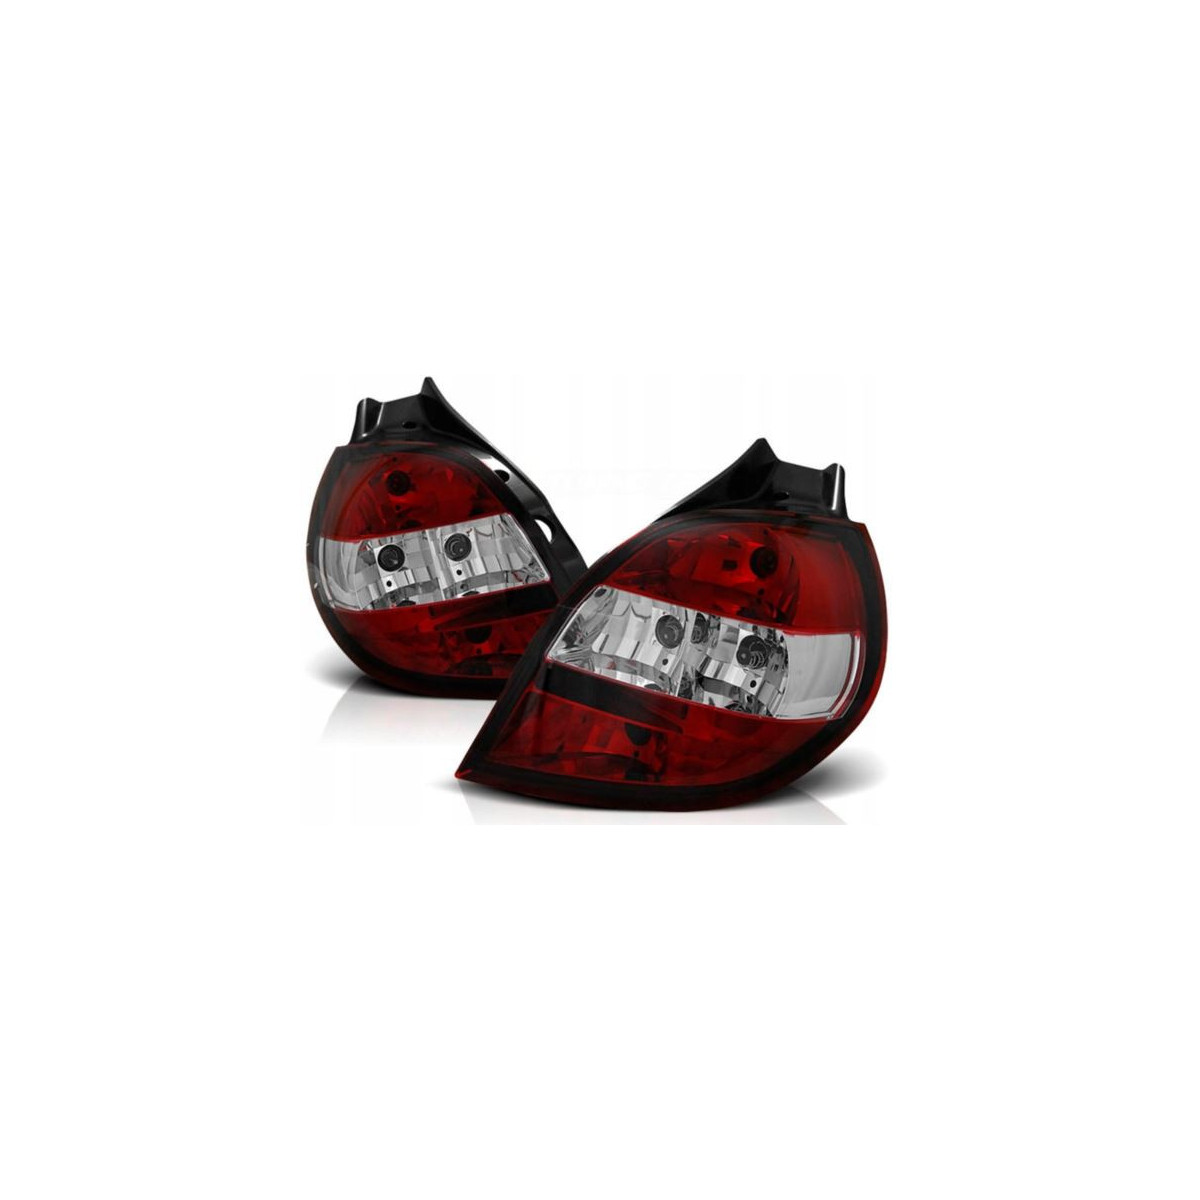 LAMPY TYLNE RENAULT CLIO 3 05-09 RED WHITE CLEAR